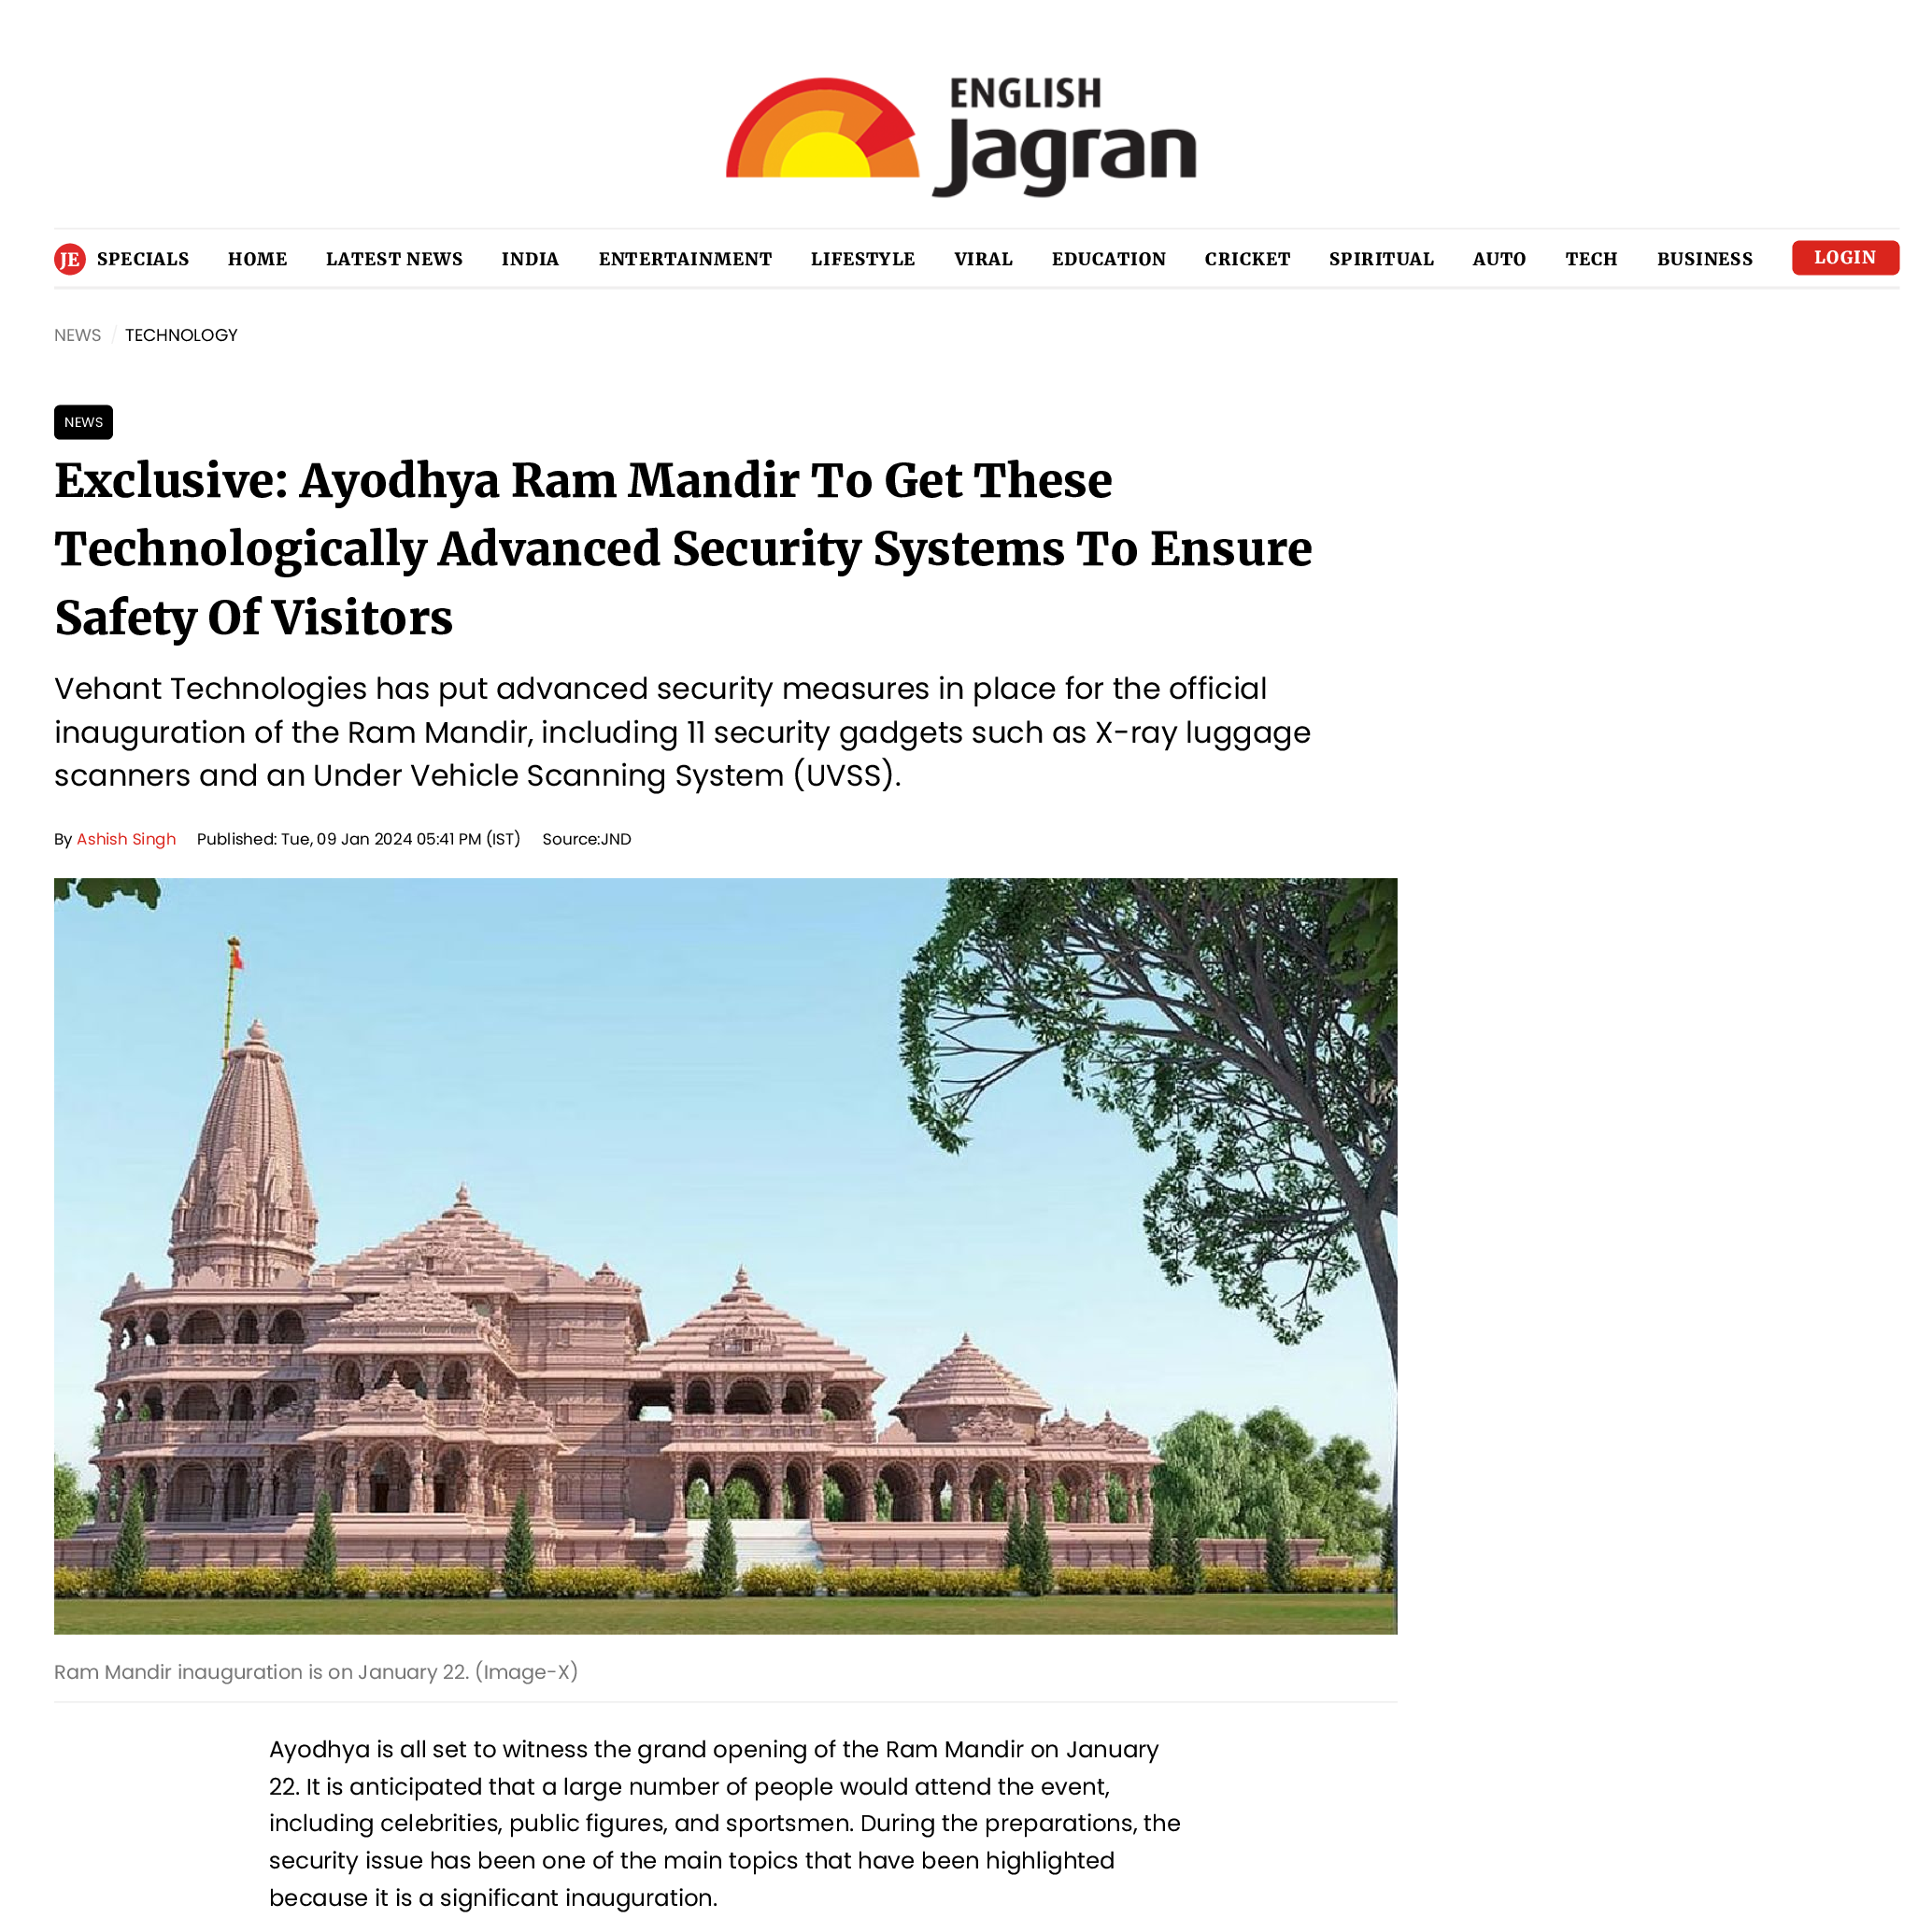 Ayodhya Ram Mandir To Get These Technologically Advanced Security Systems To Ensure Safety Of Visitors